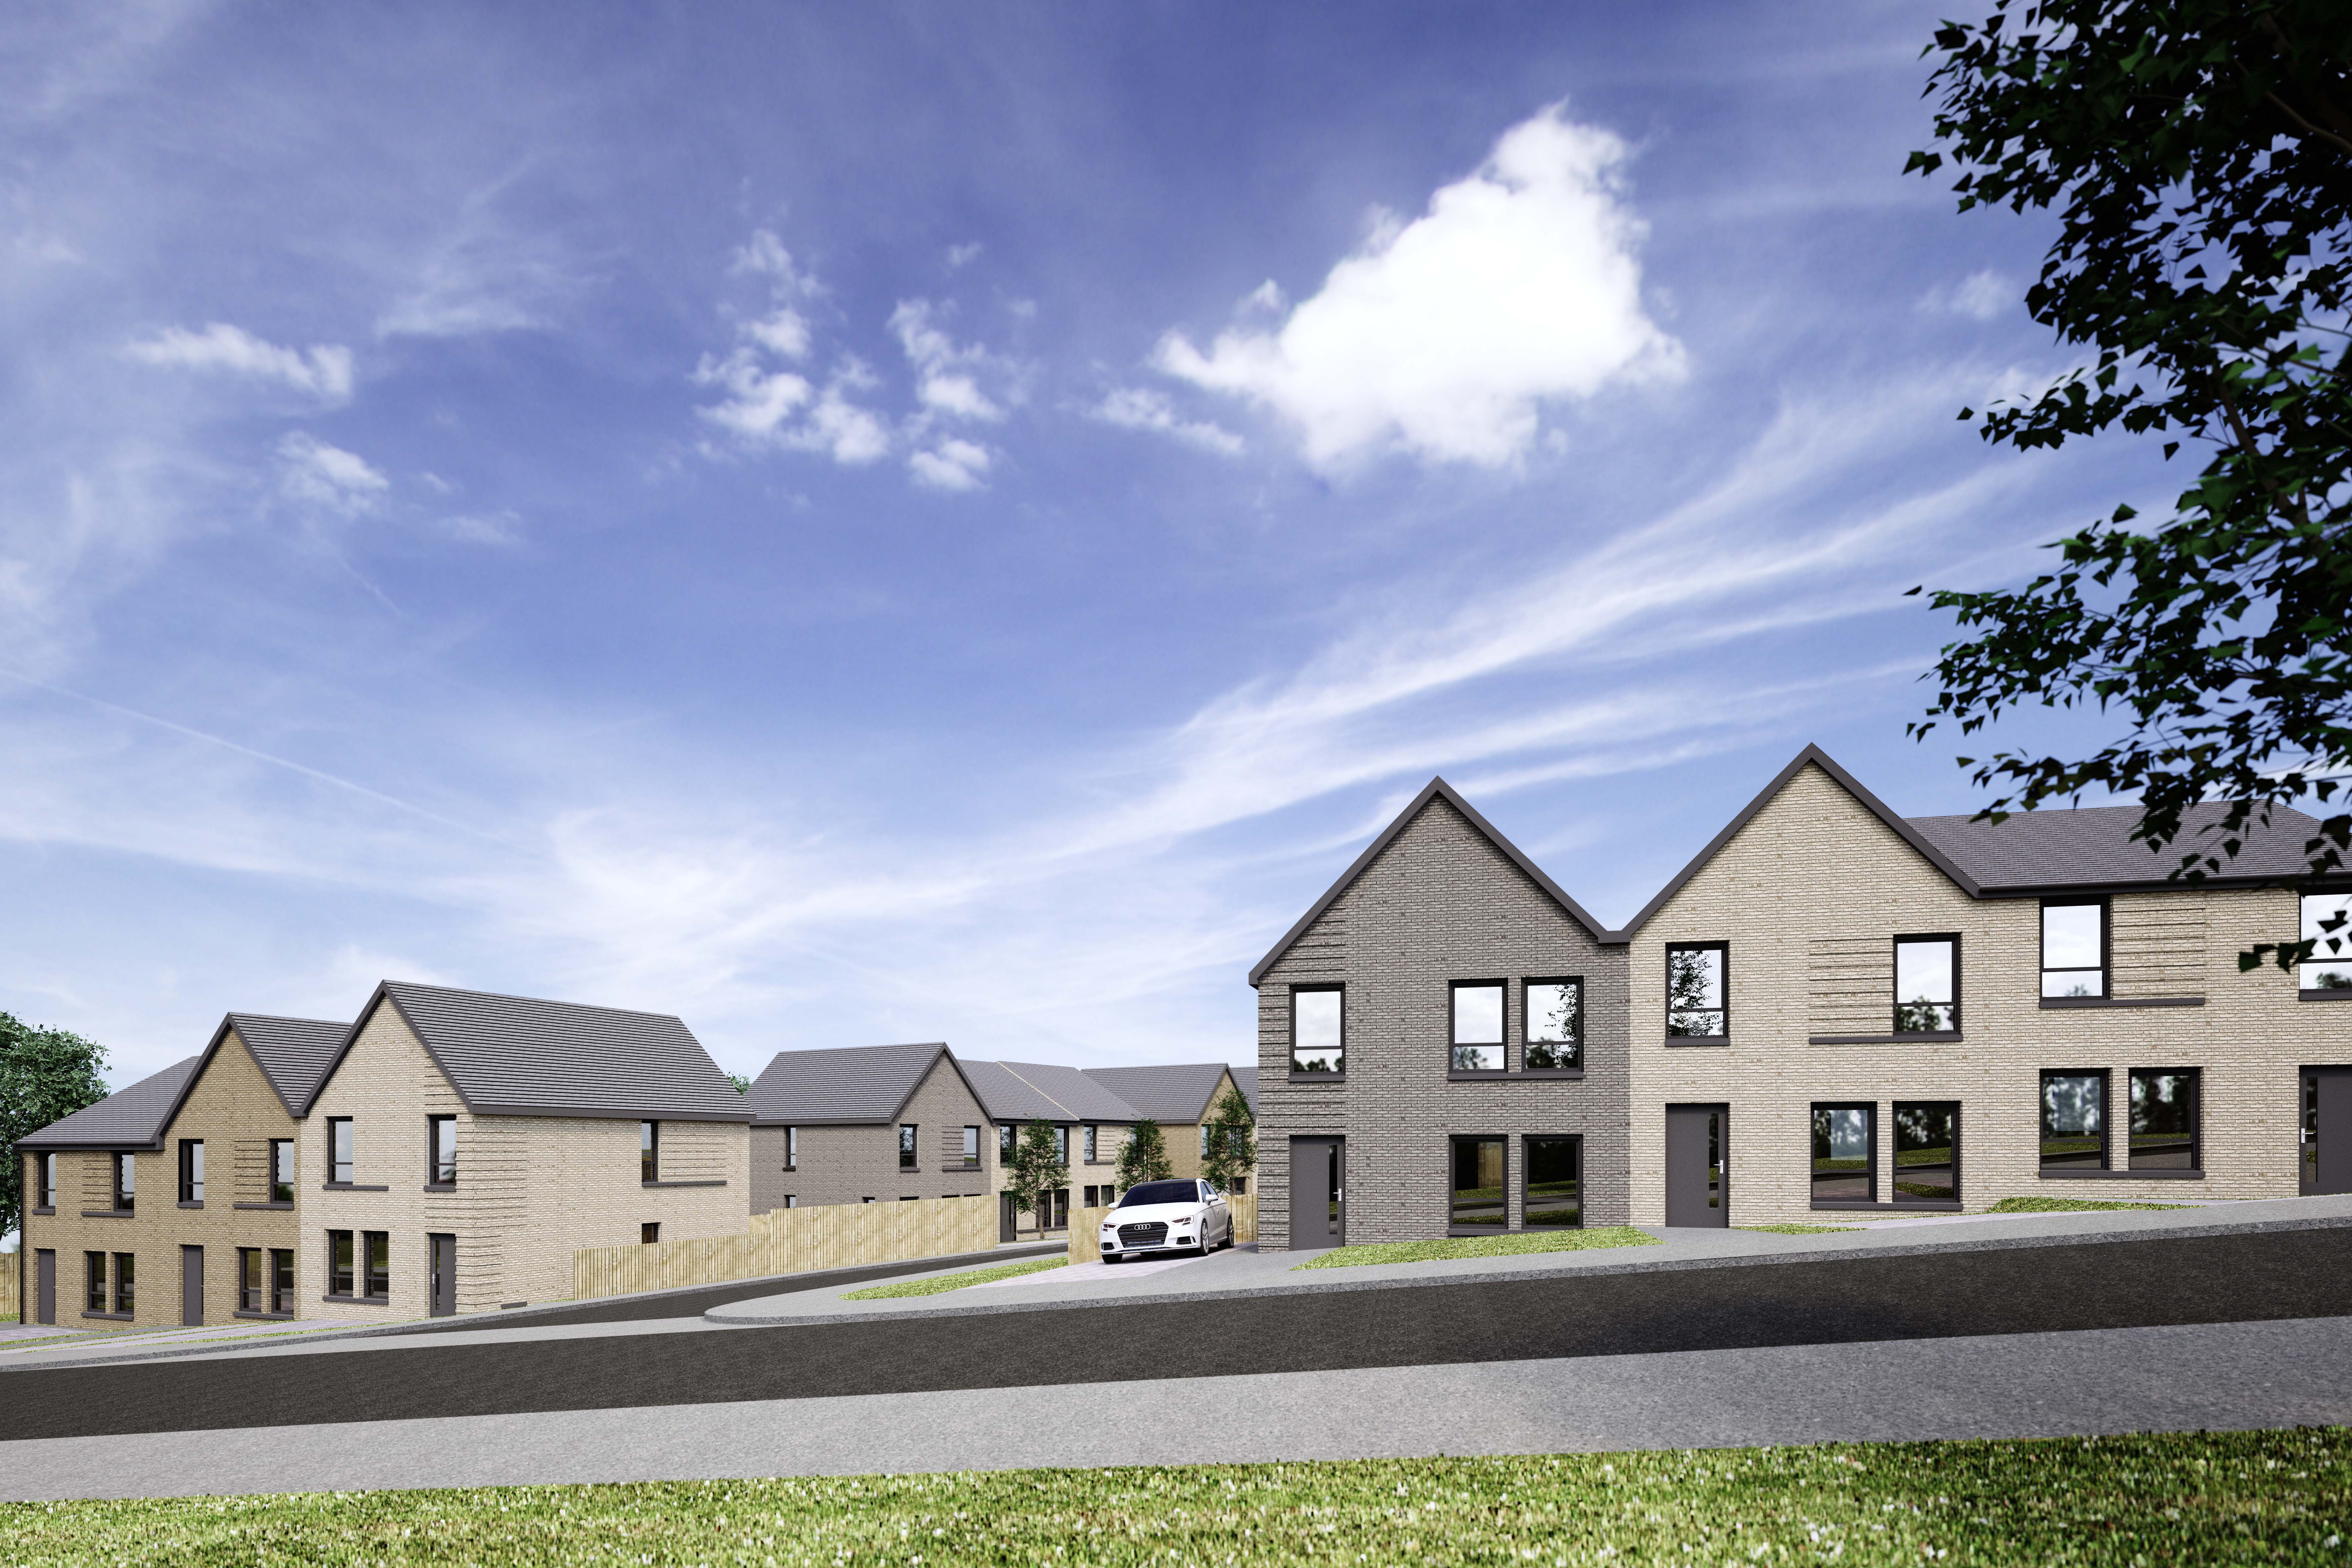 Oak Tree starts ‘significant’ £33m new build programme